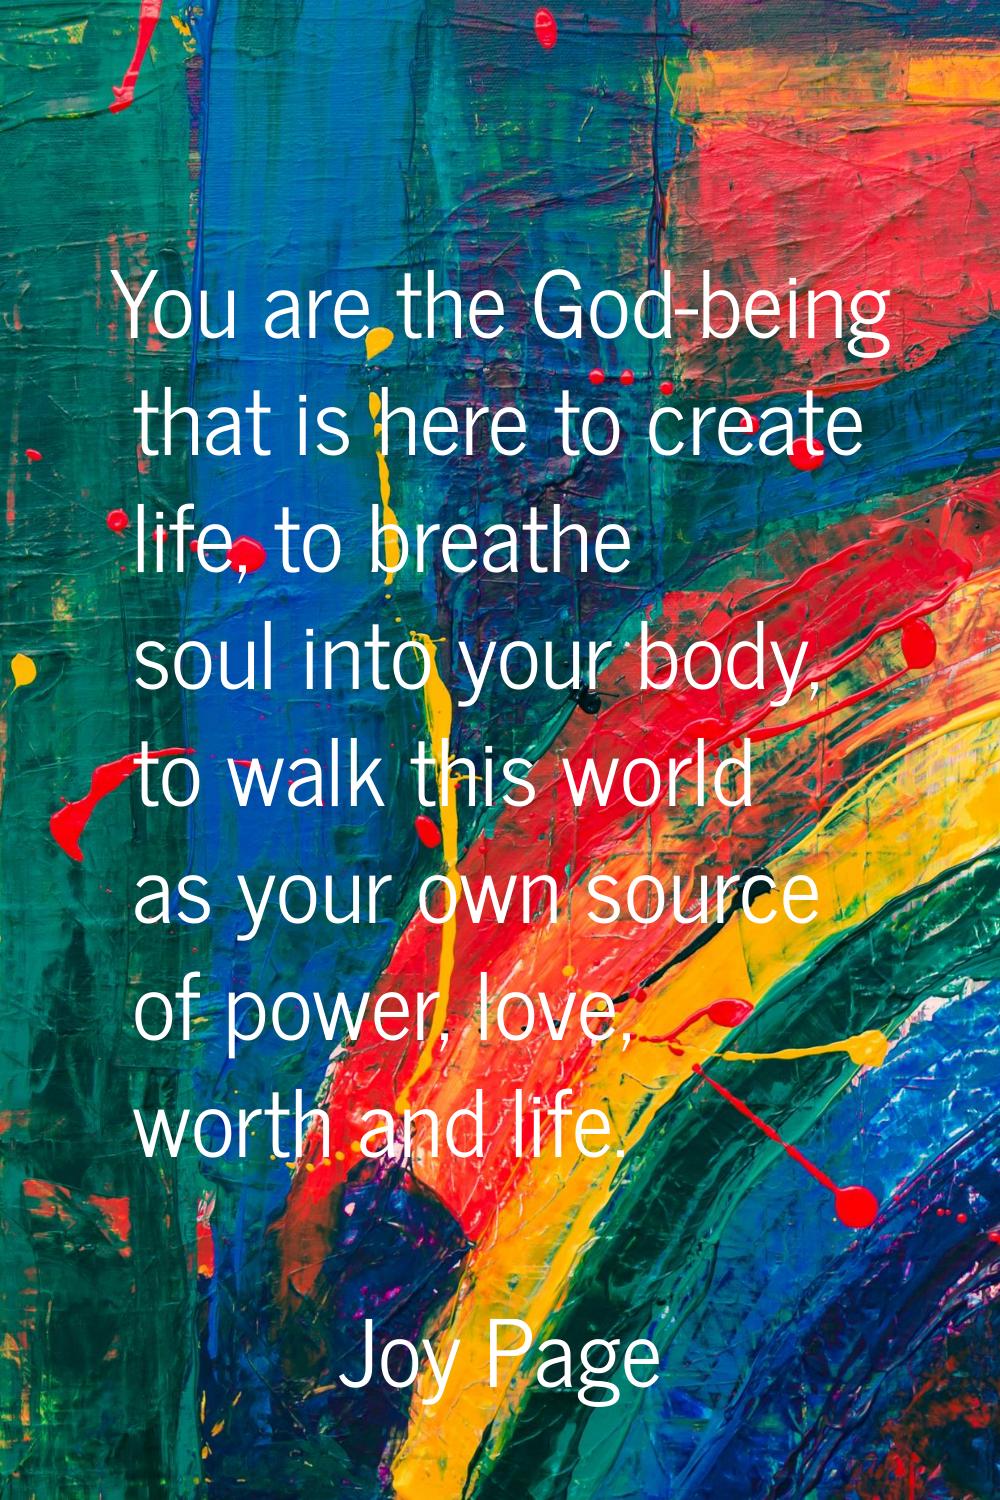 You are the God-being that is here to create life, to breathe soul into your body, to walk this wor